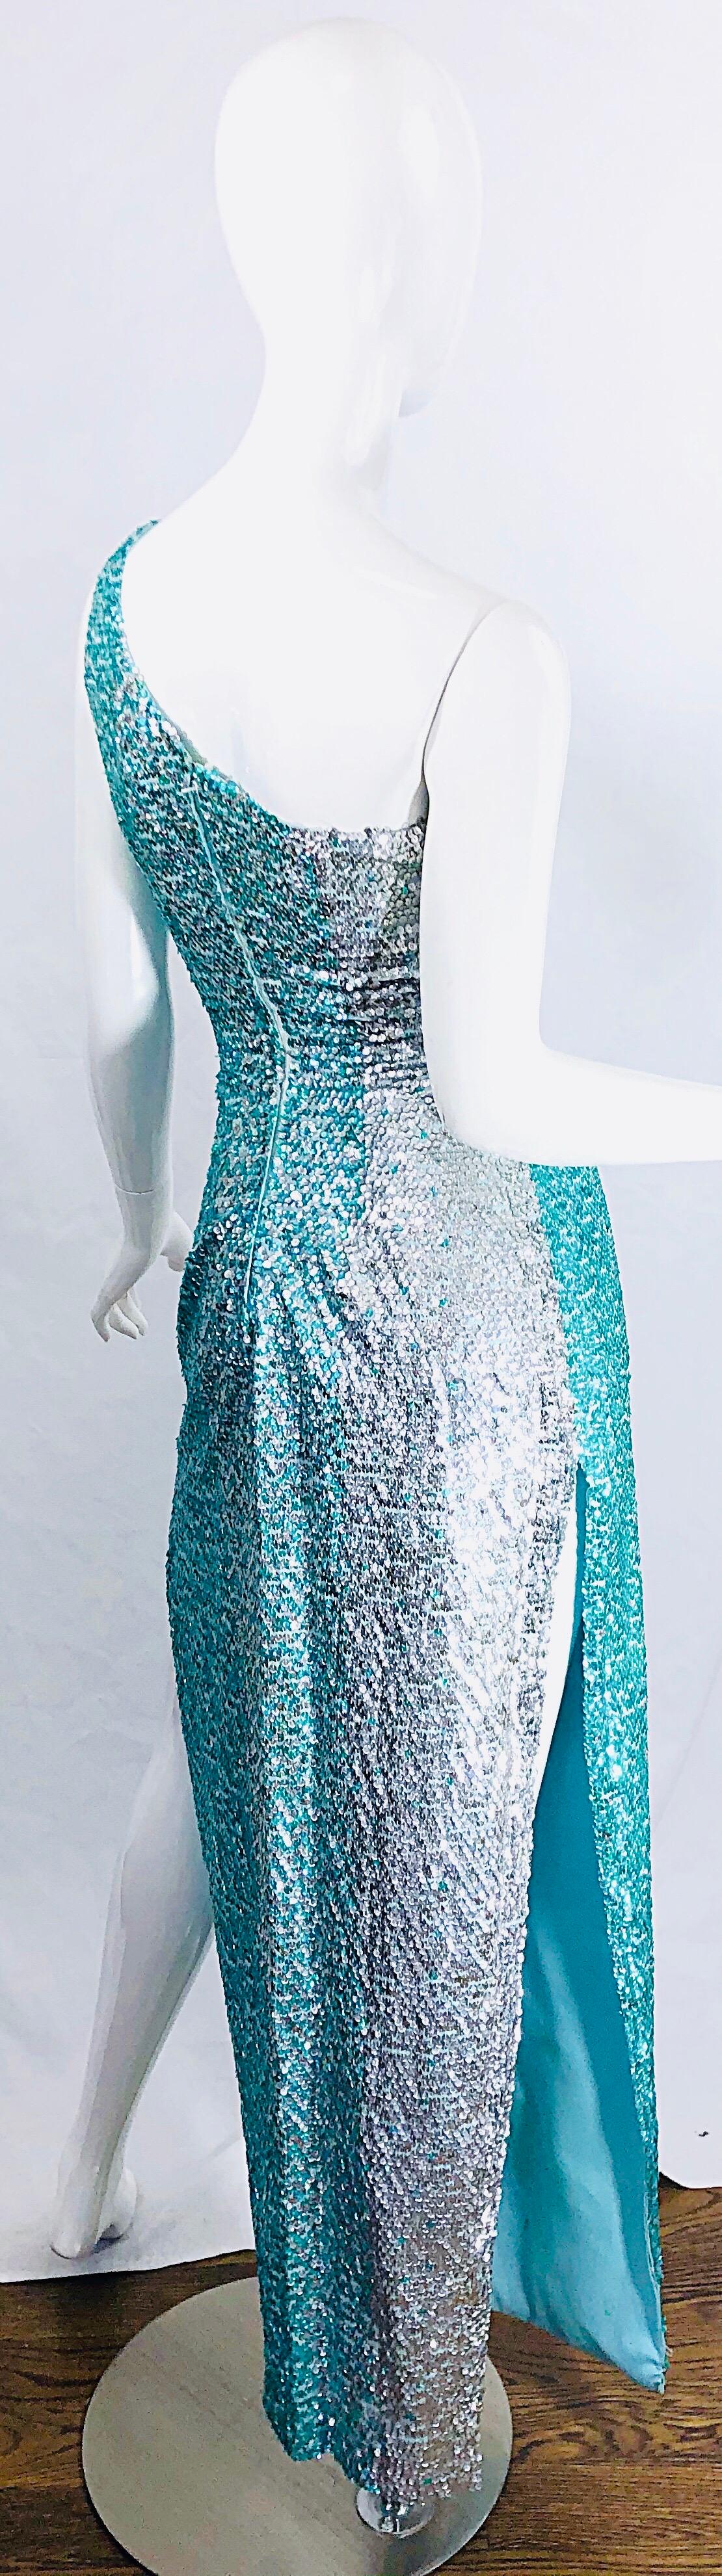 1970s Fully Sequined One Shoulder Sexy Ombre Aqua Silver Vintage 70s Gown Dress In Good Condition For Sale In San Diego, CA